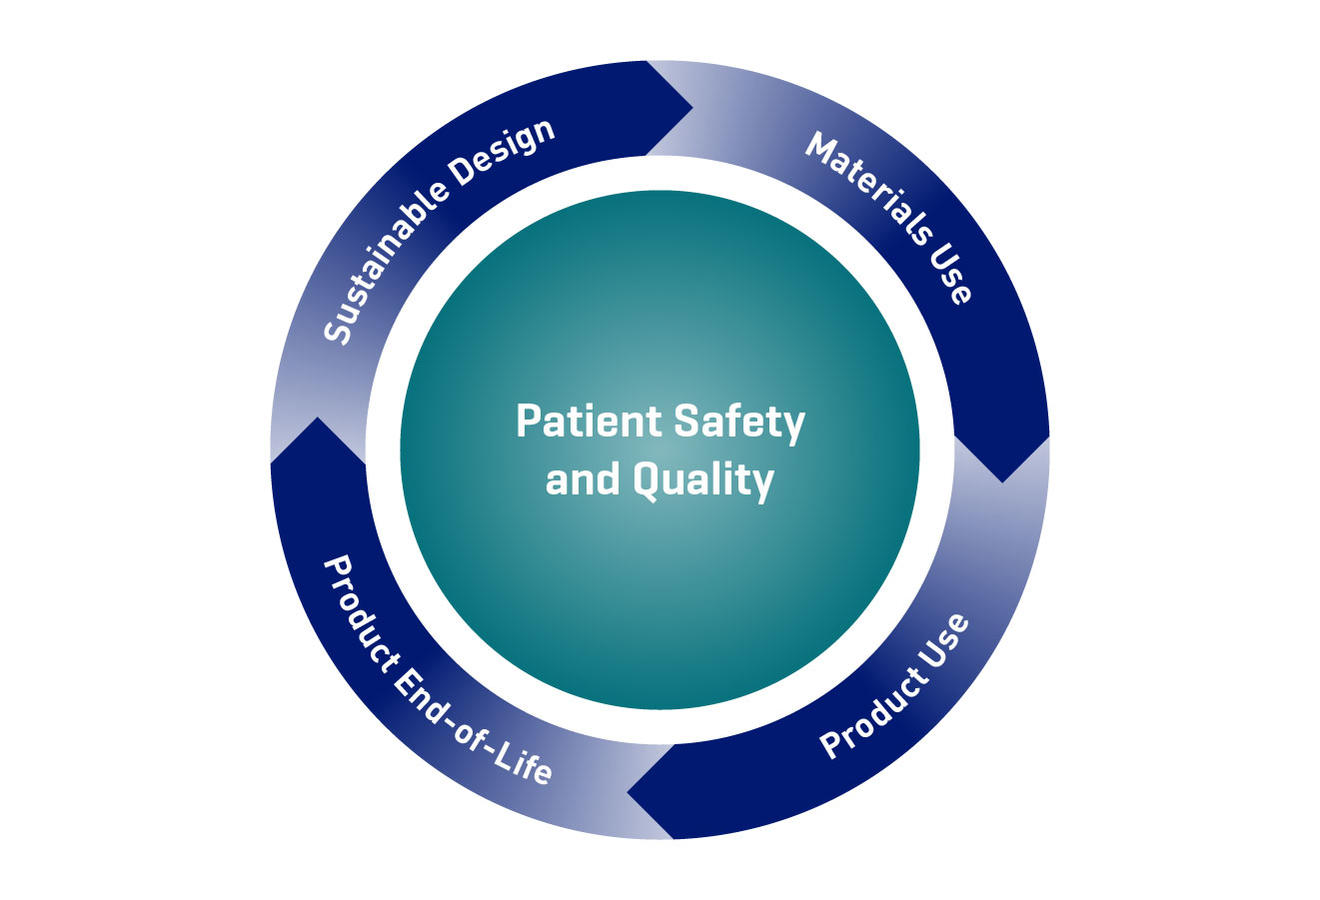 Patient_Safety_Quality_Diagram.jpg